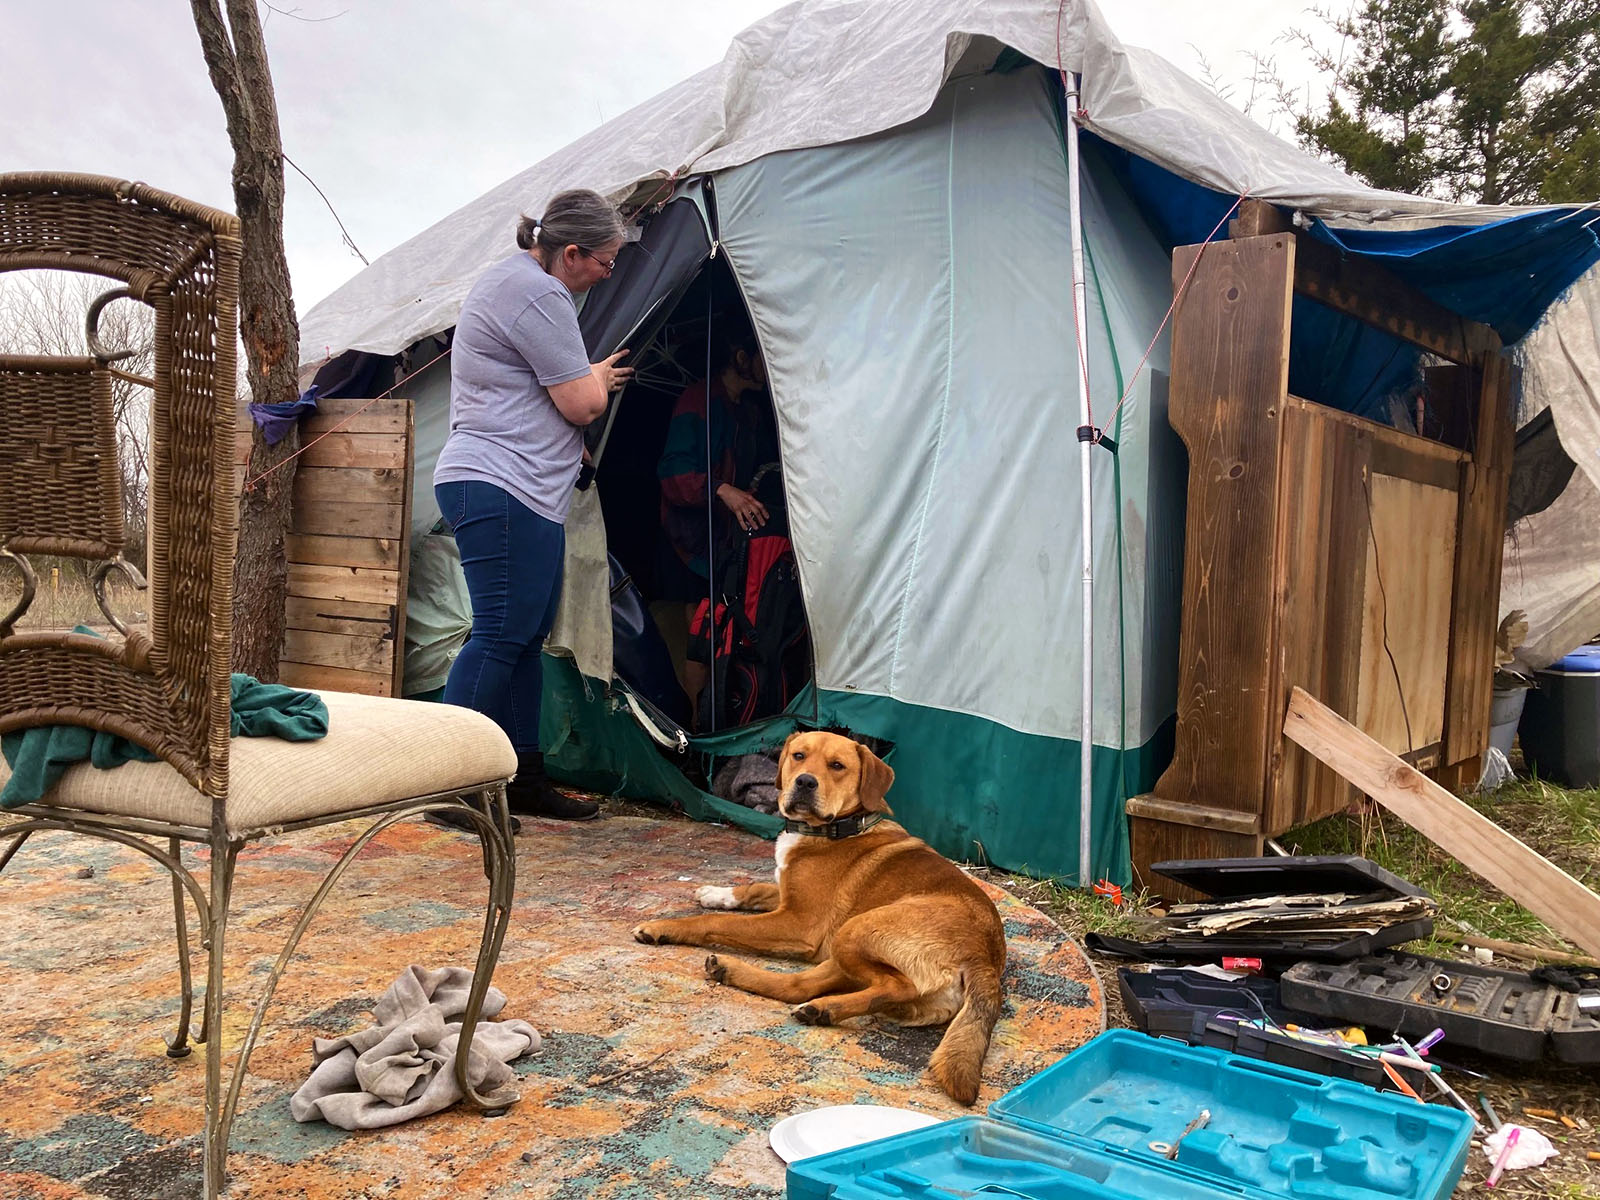 Pastor Christie Love talks with Megan, who is still inside her tent. Megan, along with several other unsheltered people, had to leave the private property on which they were camping on March 23, 2023. Megan said she had lived there for five years.